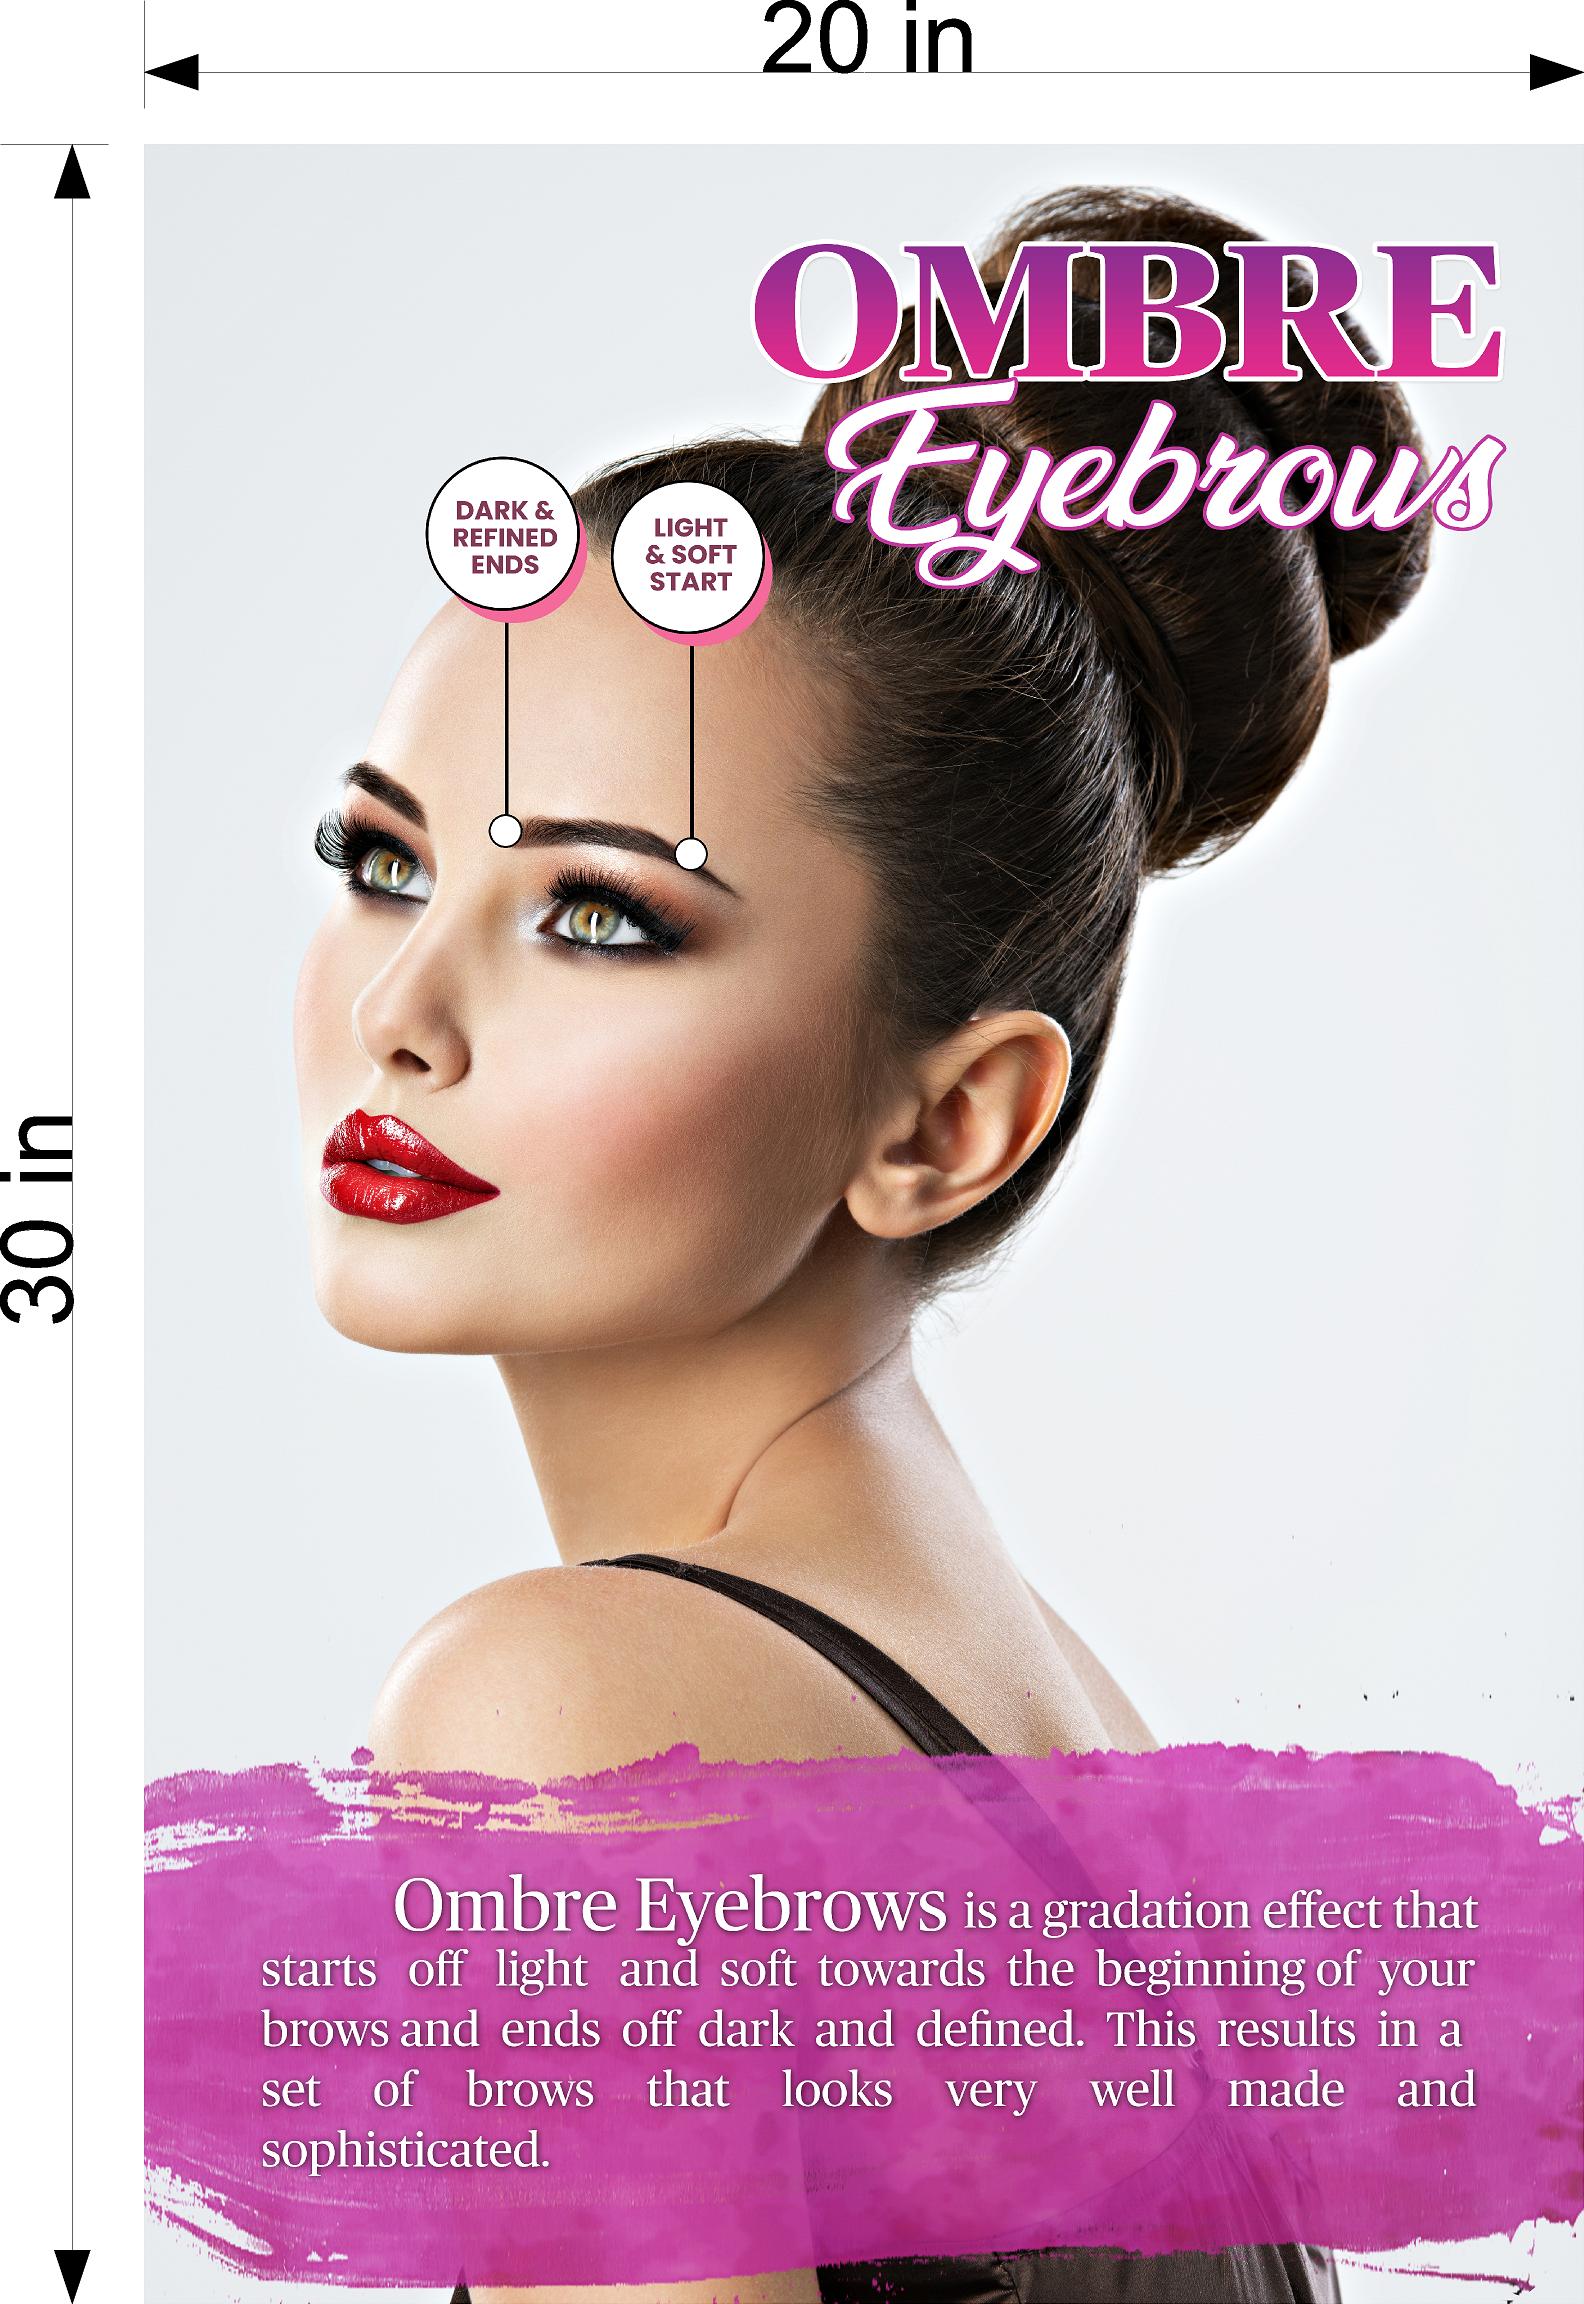 Ombre Eyebrows 07 Photo-Realistic Paper Poster Premium Interior Inside Sign Advertising Marketing Wall Window Non-Laminated Vertical